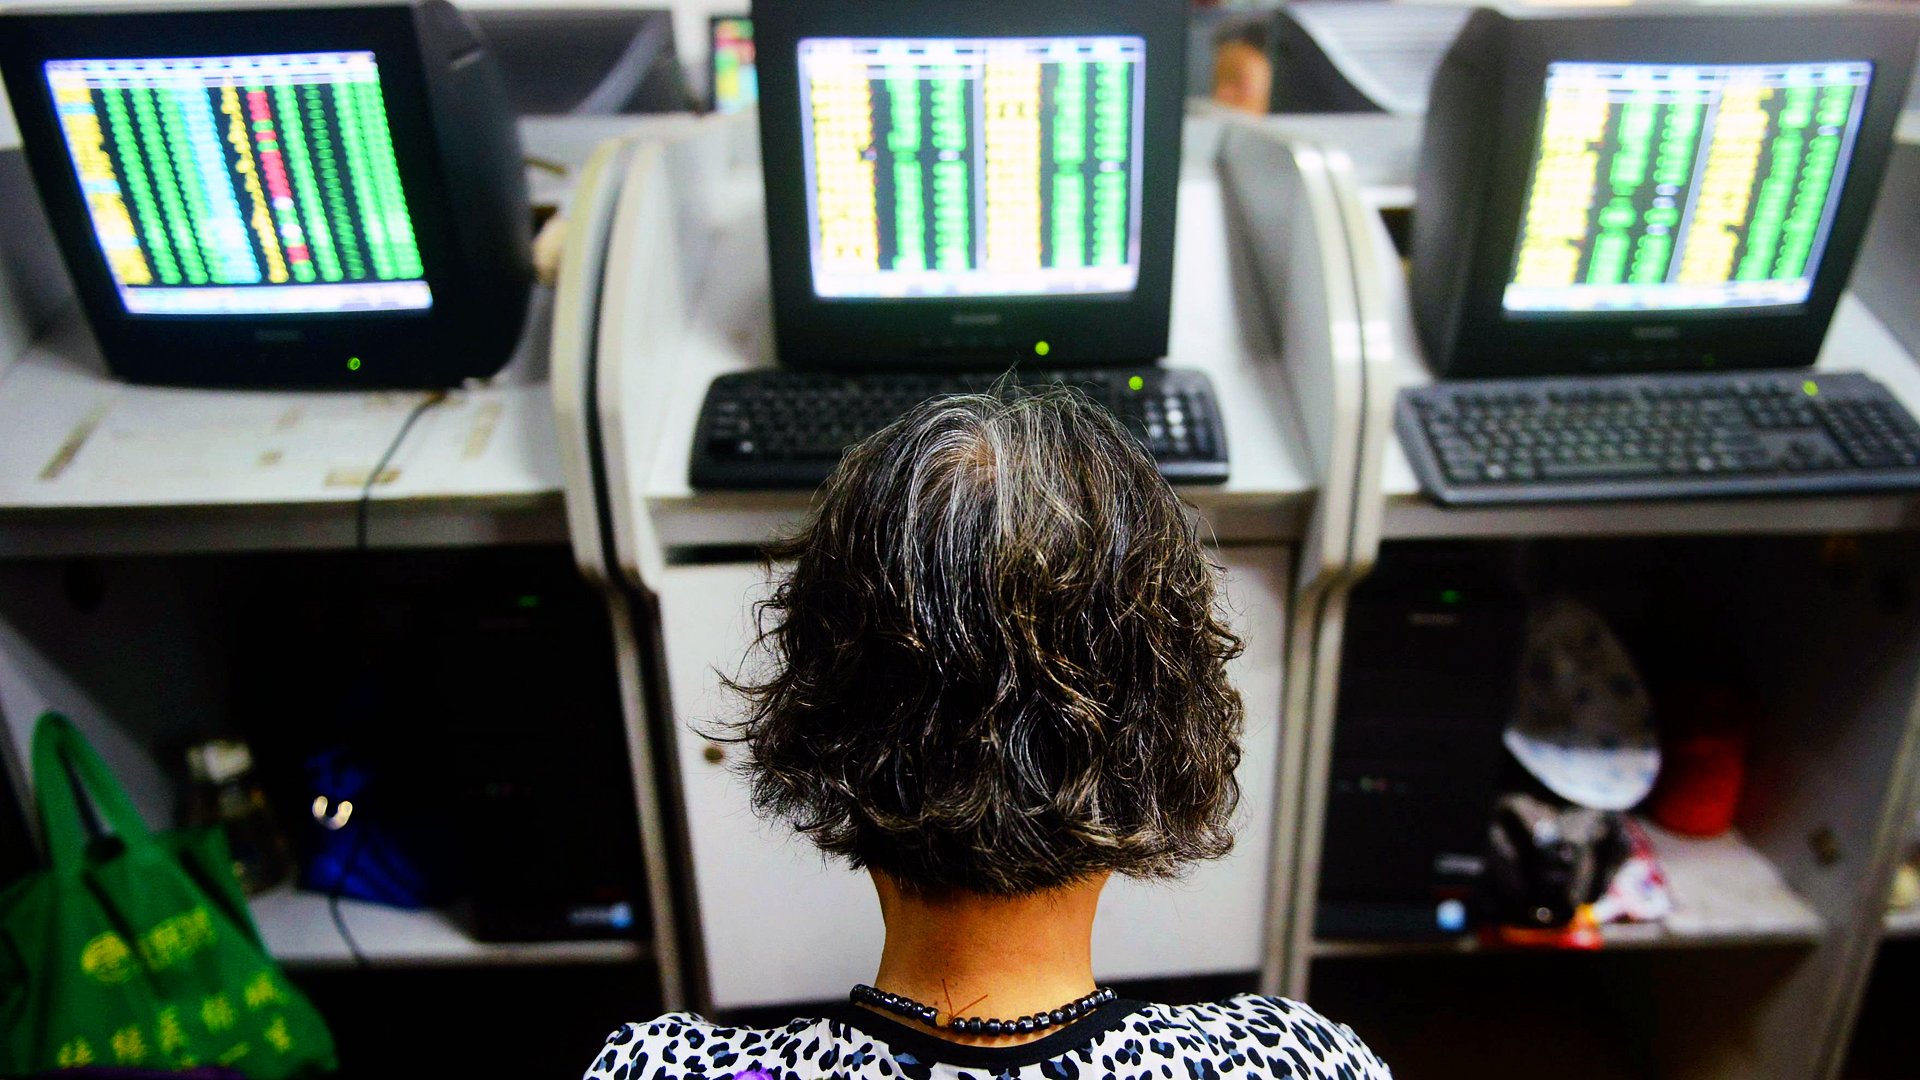 A woman investor in China eyes a bank of electronic monitors showing stock prices as stocks in Shanghai recovered from an early beating on Tuesday. Photo: Xinhua